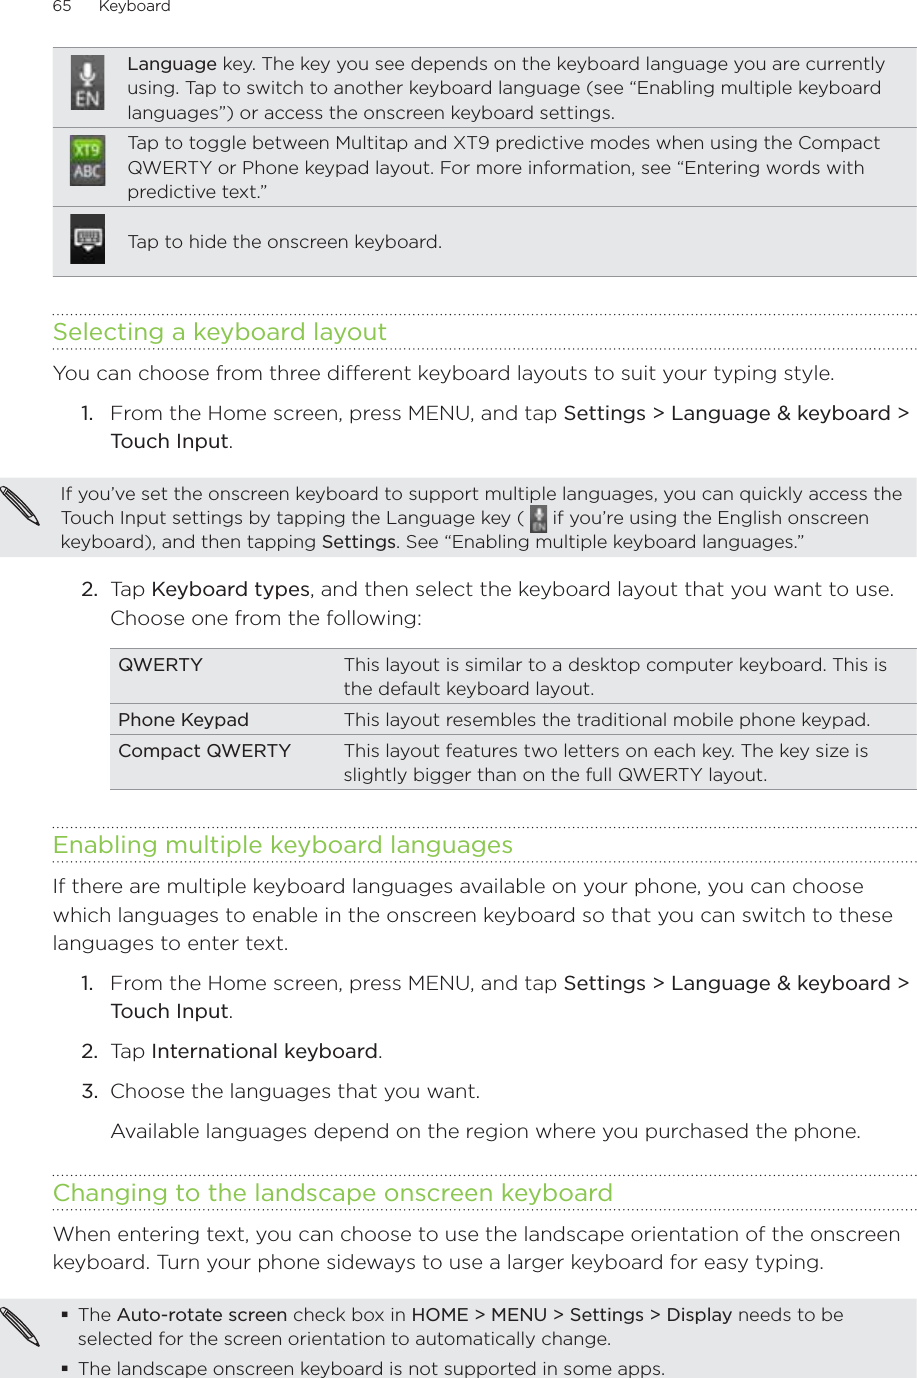 65      Keyboard      Language key. The key you see depends on the keyboard language you are currently using. Tap to switch to another keyboard language (see “Enabling multiple keyboard languages”) or access the onscreen keyboard settings.Tap to toggle between Multitap and XT9 predictive modes when using the Compact QWERTY or Phone keypad layout. For more information, see “Entering words with predictive text.”Tap to hide the onscreen keyboard.Selecting a keyboard layoutYou can choose from three different keyboard layouts to suit your typing style.1.  From the Home screen, press MENU, and tap Settings &gt; Language &amp; keyboard &gt; Touch Input.If you’ve set the onscreen keyboard to support multiple languages, you can quickly access the Touch Input settings by tapping the Language key (   if you’re using the English onscreen keyboard), and then tapping Settings. See “Enabling multiple keyboard languages.”2.  Tap Keyboard types, and then select the keyboard layout that you want to use. Choose one from the following:QWERTY This layout is similar to a desktop computer keyboard. This is the default keyboard layout.Phone Keypad This layout resembles the traditional mobile phone keypad.Compact QWERTY This layout features two letters on each key. The key size is slightly bigger than on the full QWERTY layout.Enabling multiple keyboard languagesIf there are multiple keyboard languages available on your phone, you can choose which languages to enable in the onscreen keyboard so that you can switch to these languages to enter text.1.  From the Home screen, press MENU, and tap Settings &gt; Language &amp; keyboard &gt; Touch Input.2.  Tap International keyboard.3.  Choose the languages that you want.Available languages depend on the region where you purchased the phone.Changing to the landscape onscreen keyboardWhen entering text, you can choose to use the landscape orientation of the onscreen keyboard. Turn your phone sideways to use a larger keyboard for easy typing.The Auto-rotate screen check box in HOME &gt; MENU &gt; Settings &gt; Display needs to be selected for the screen orientation to automatically change.The landscape onscreen keyboard is not supported in some apps.